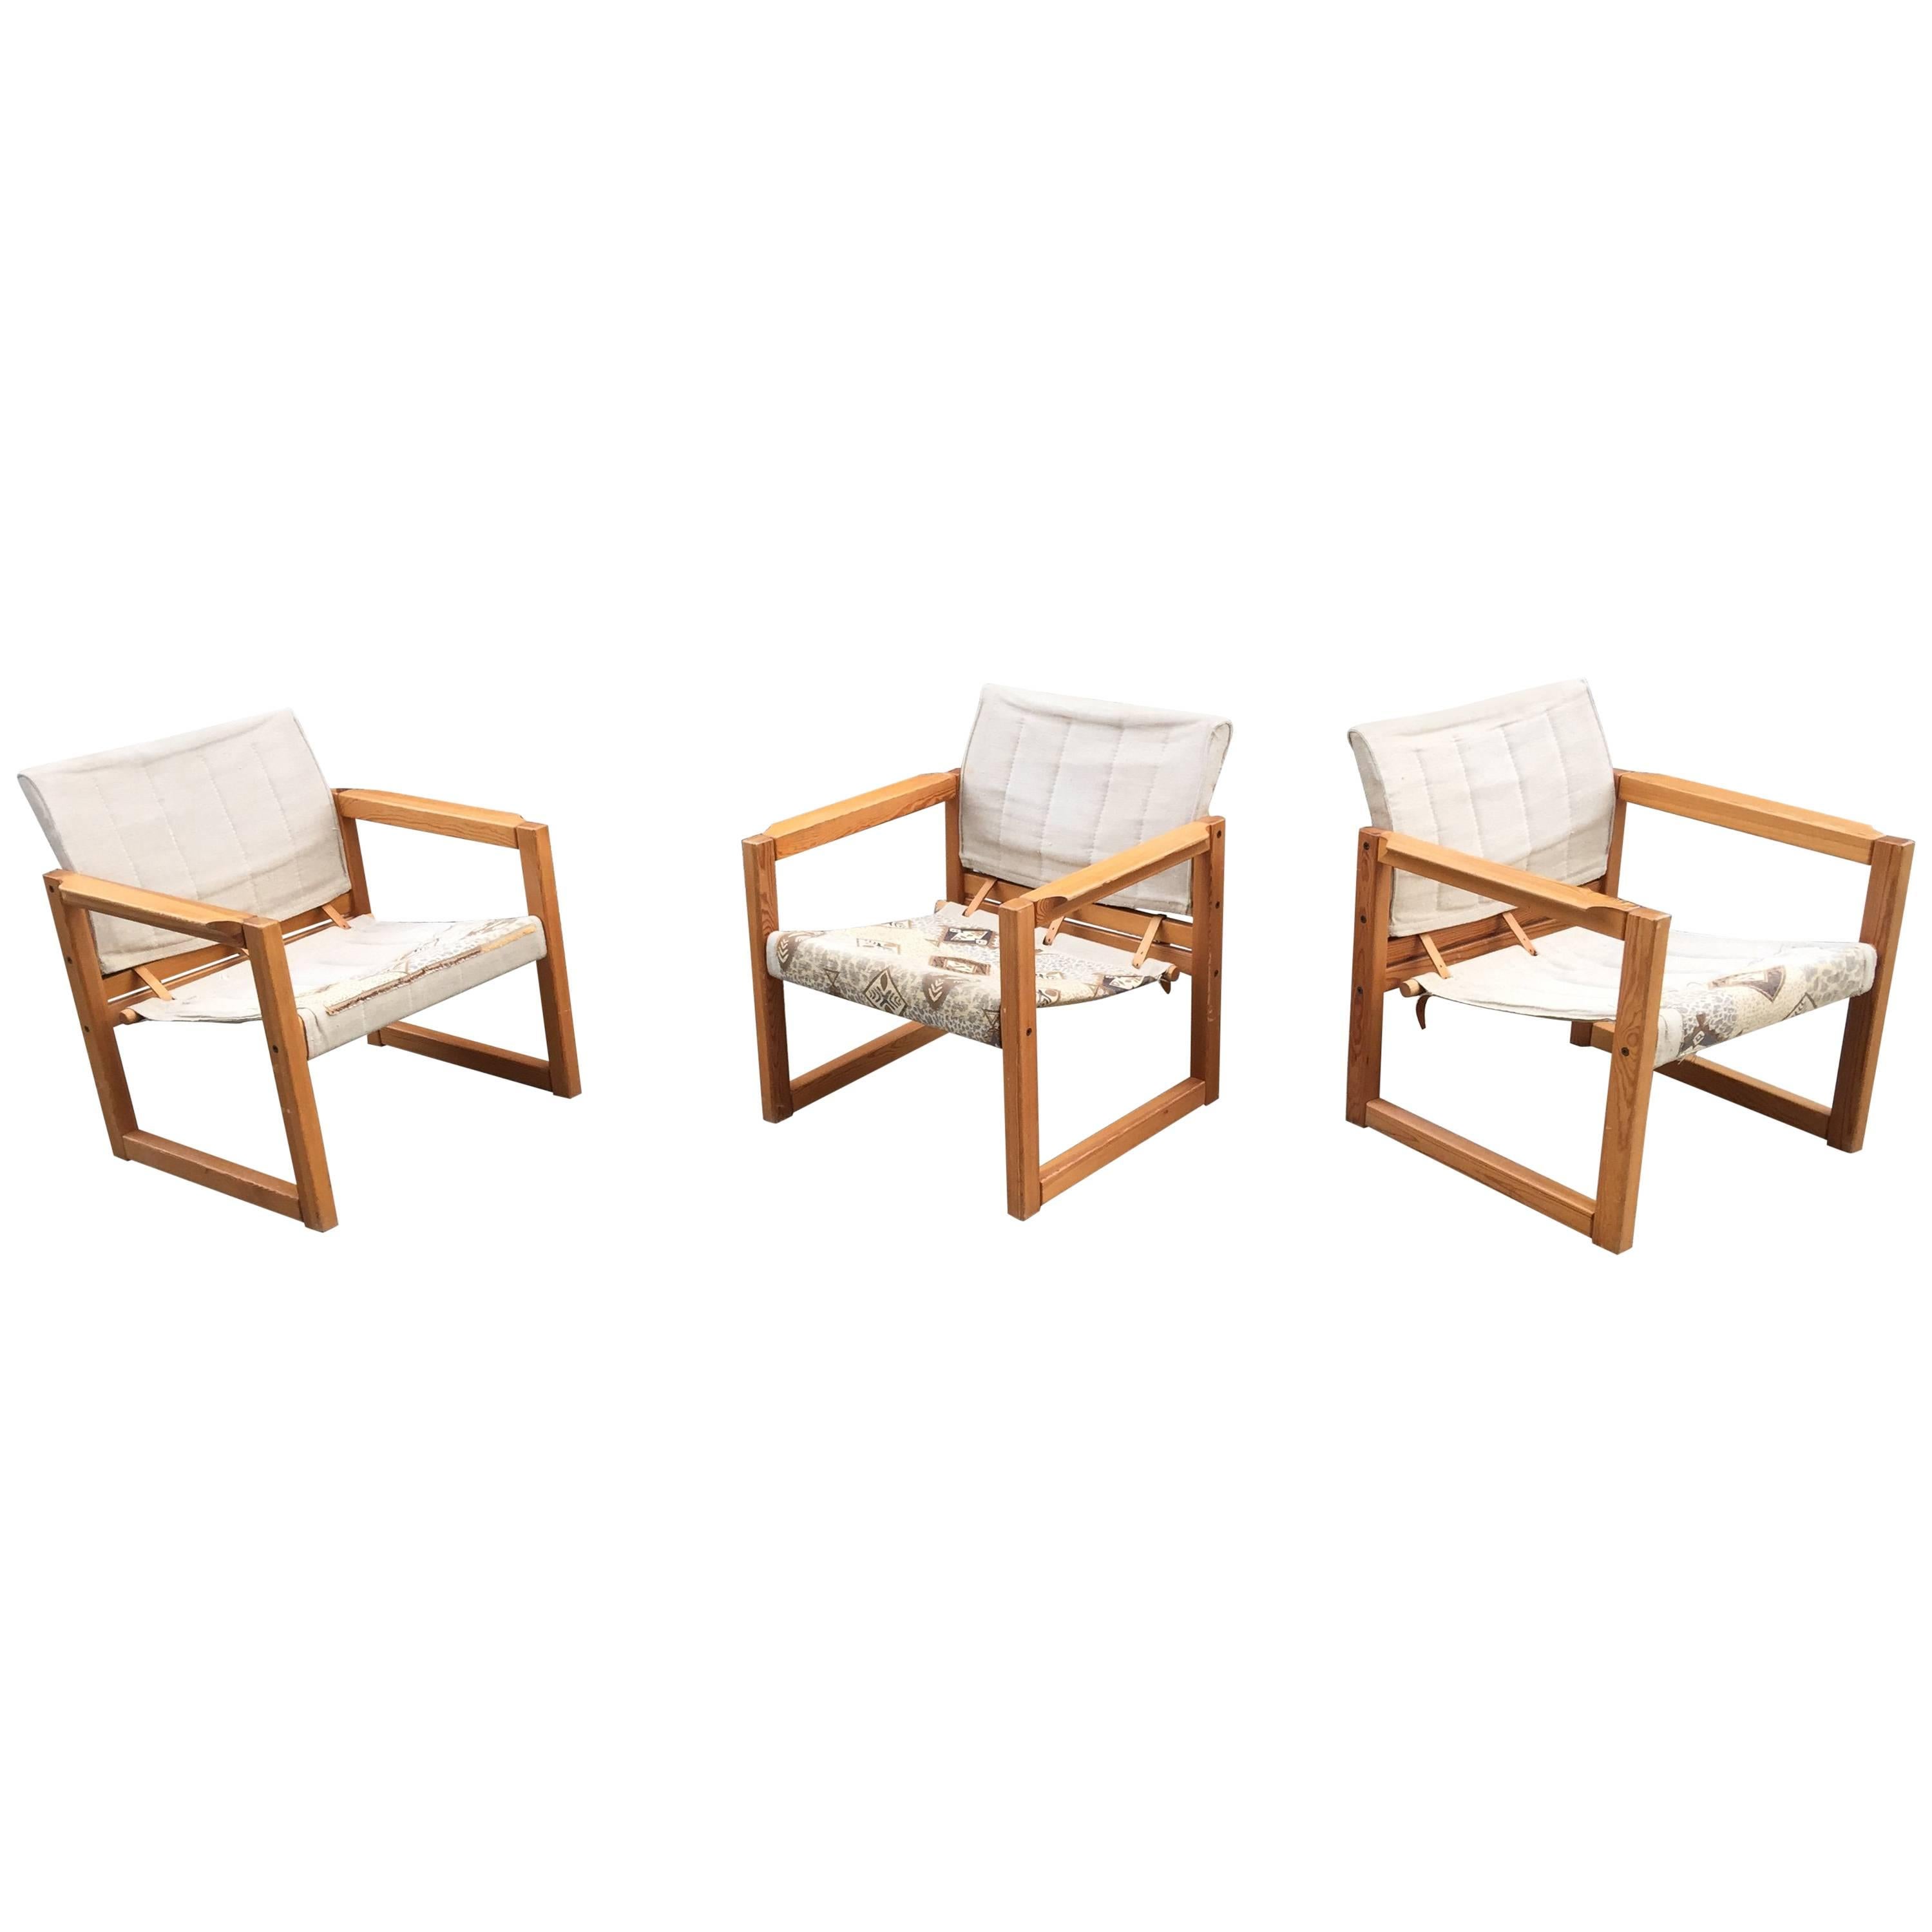  Three Armchairs in Pine and Leather, circa 1970